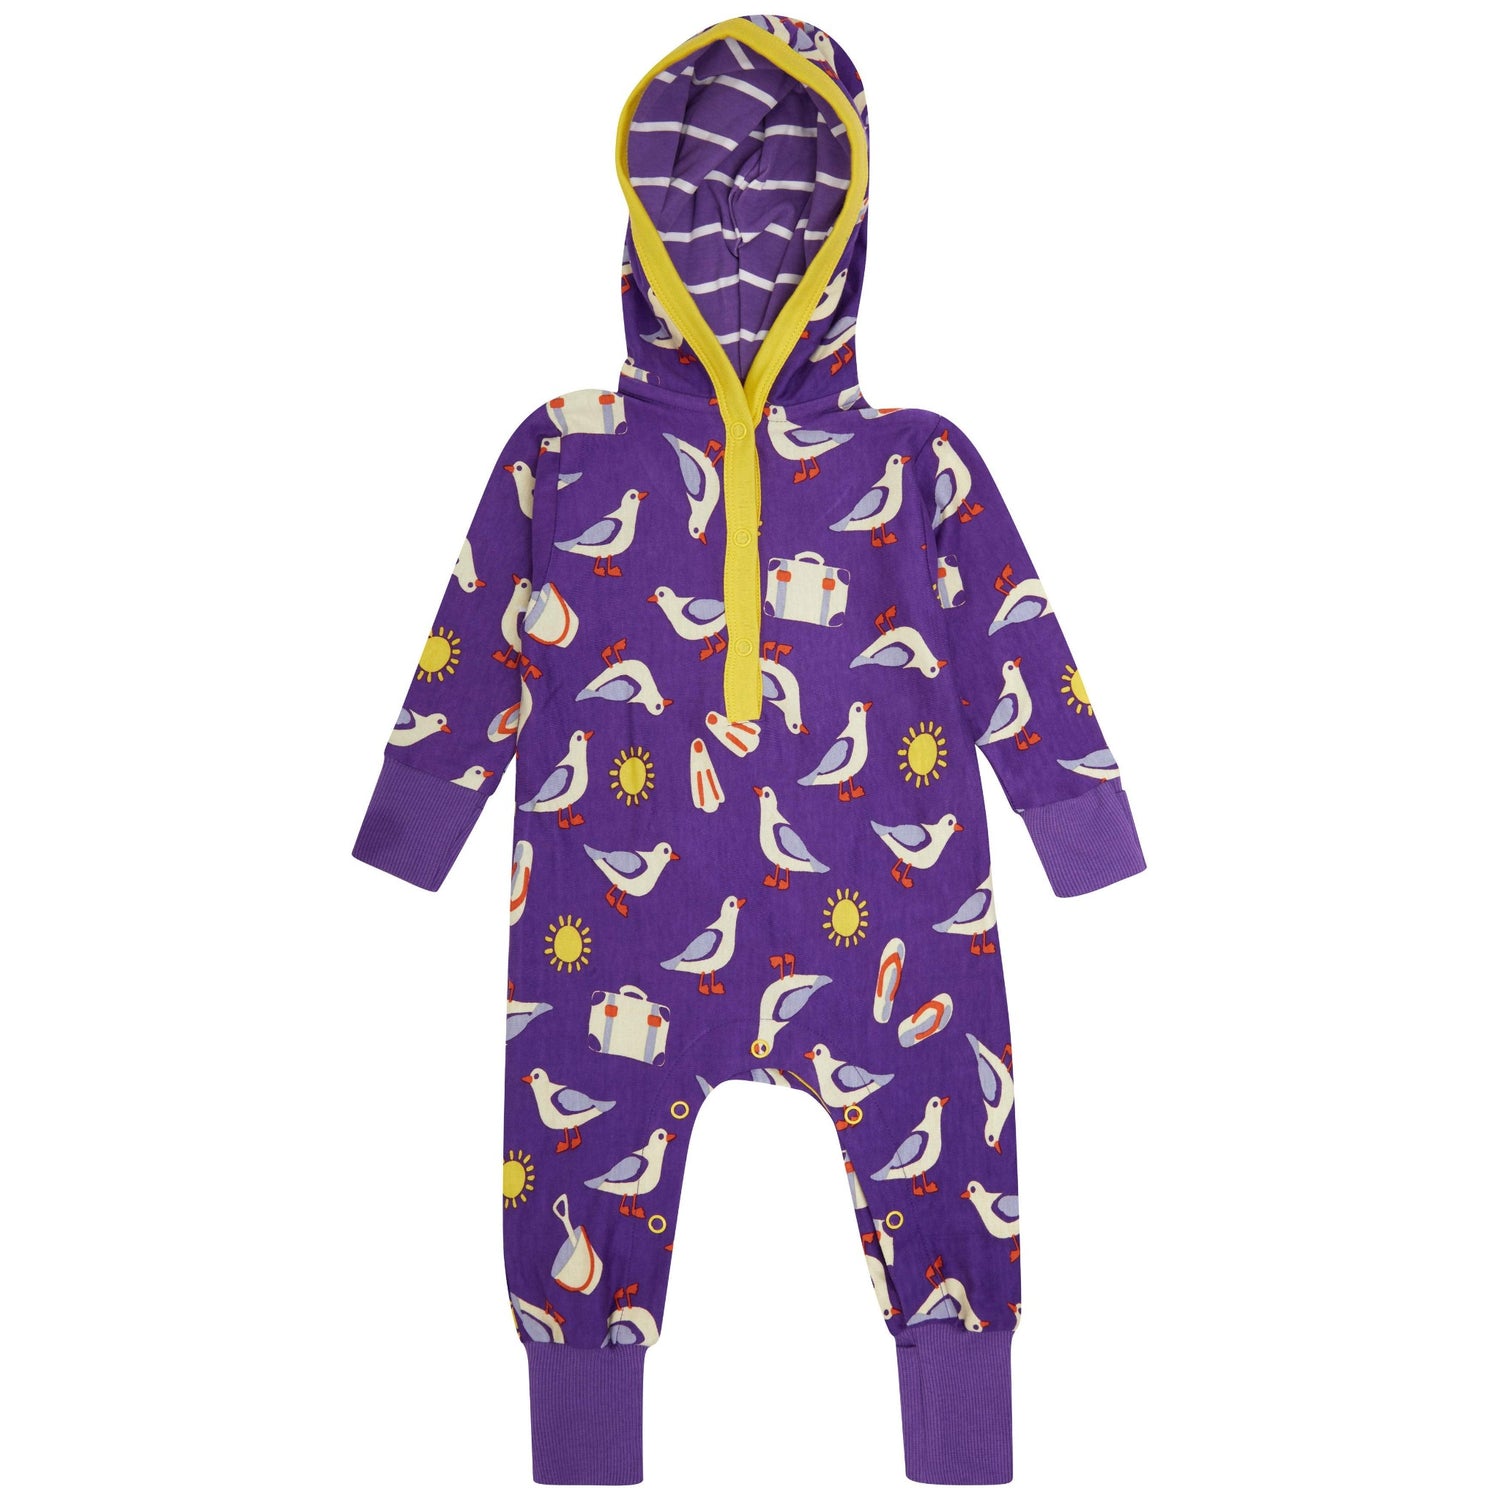 Hooded baby playsuit with seagull print